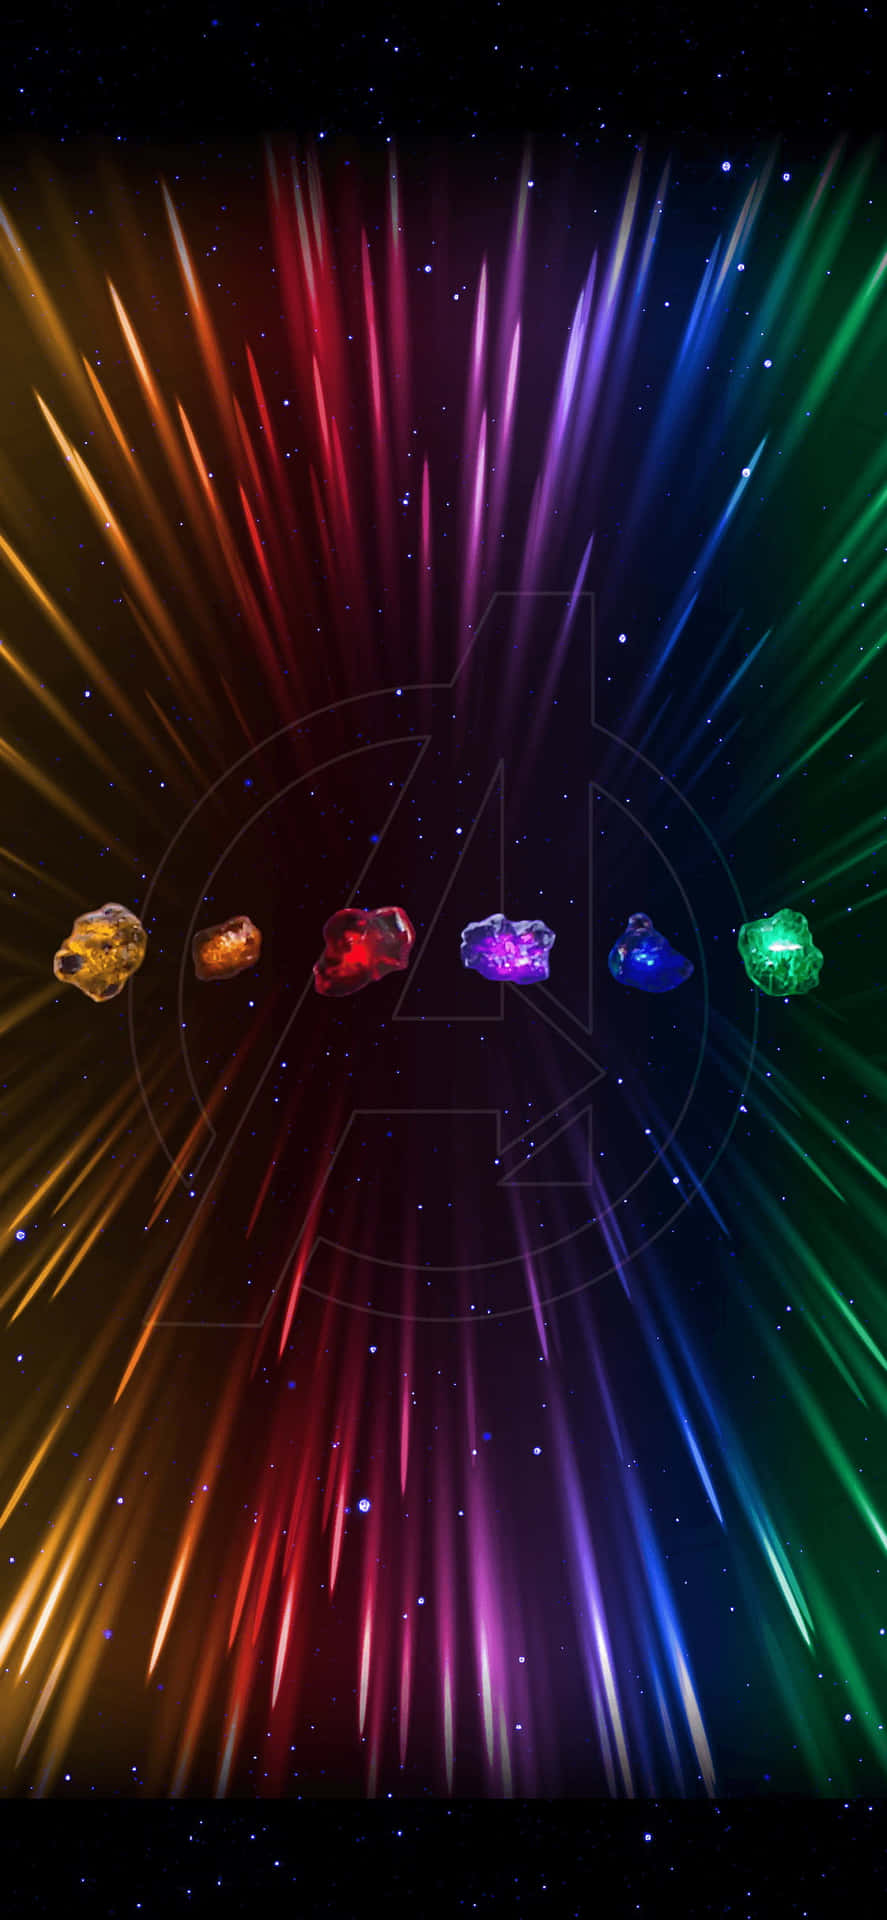 The powerful Infinity Gems unified on a cosmic background Wallpaper